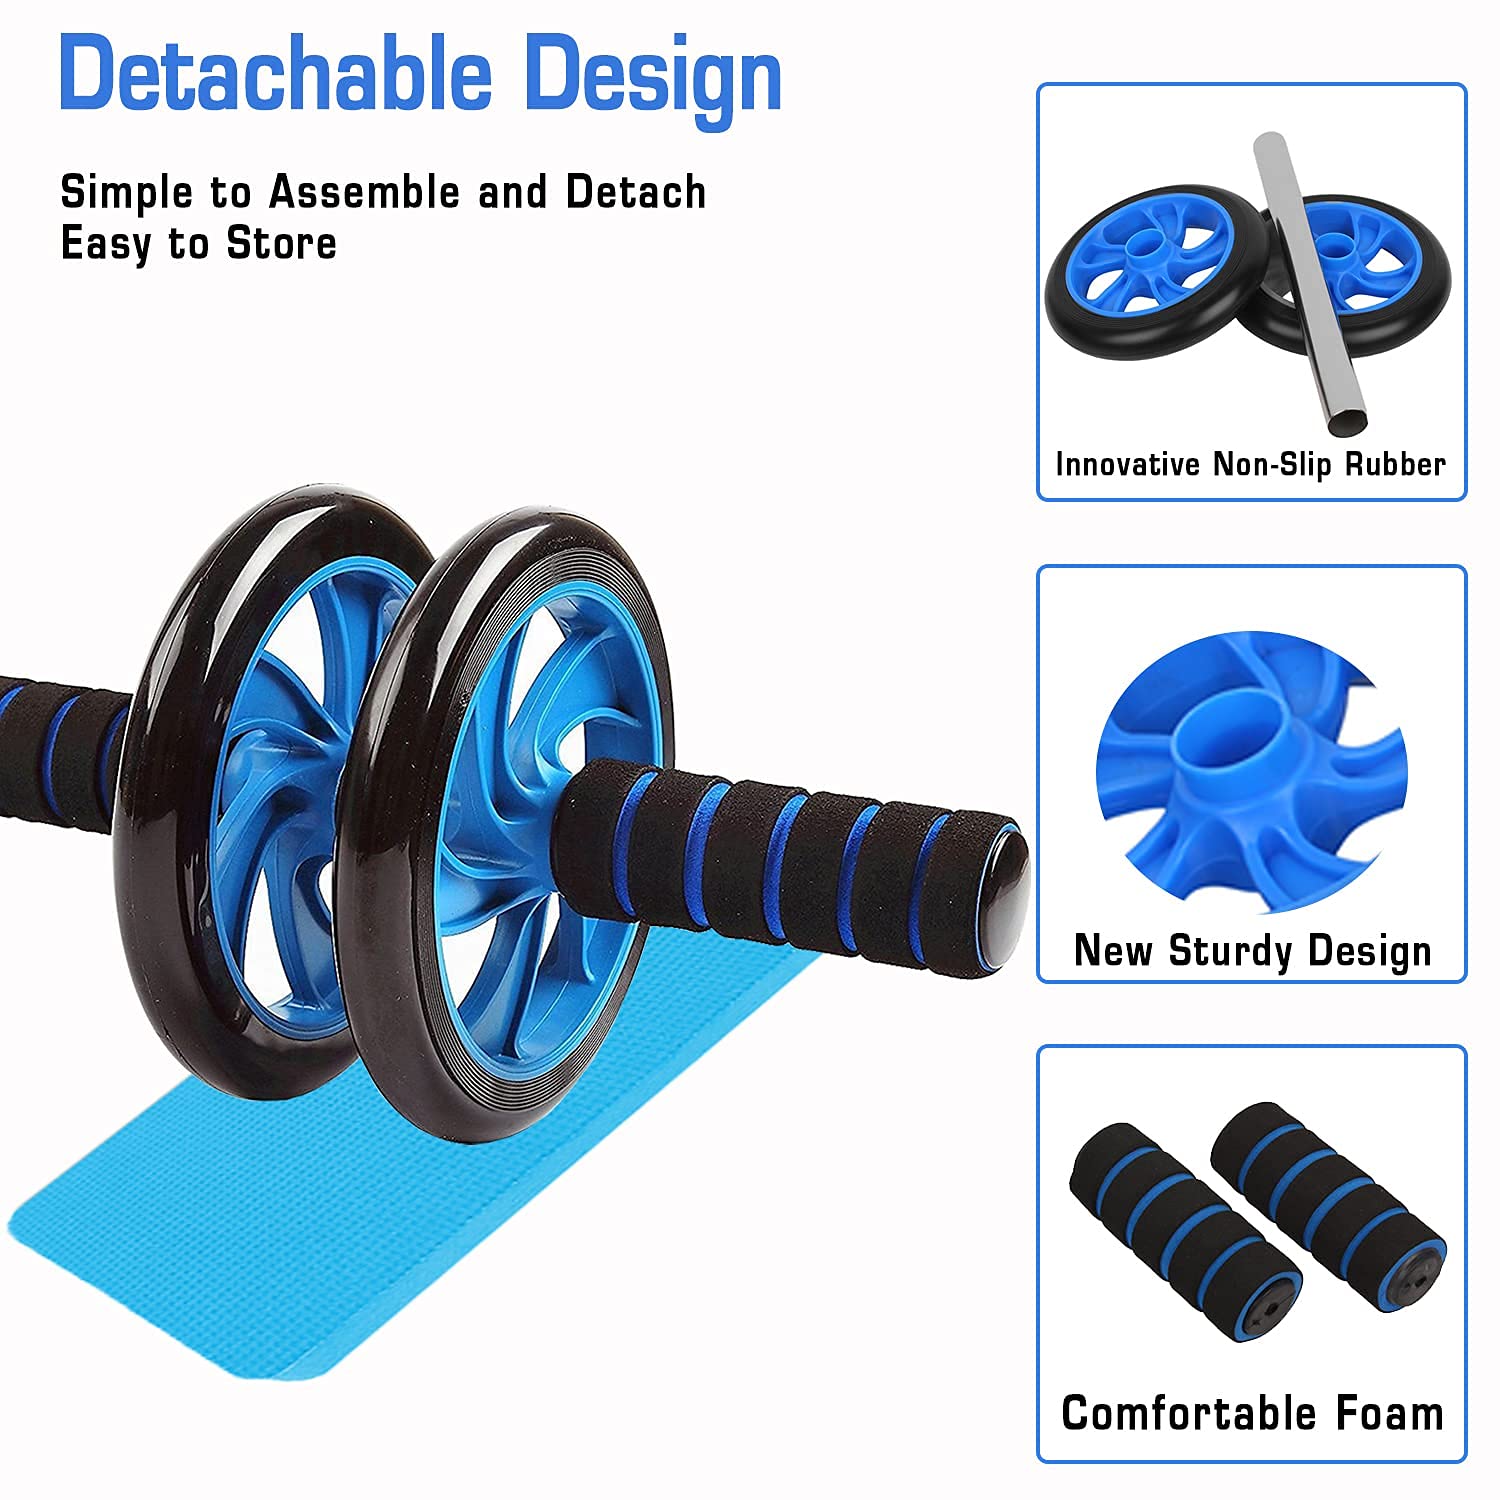 Double Ab WheelRoller With Knee Pad|Abs Roller|Exercise Roller Wheel (Pack of 2)